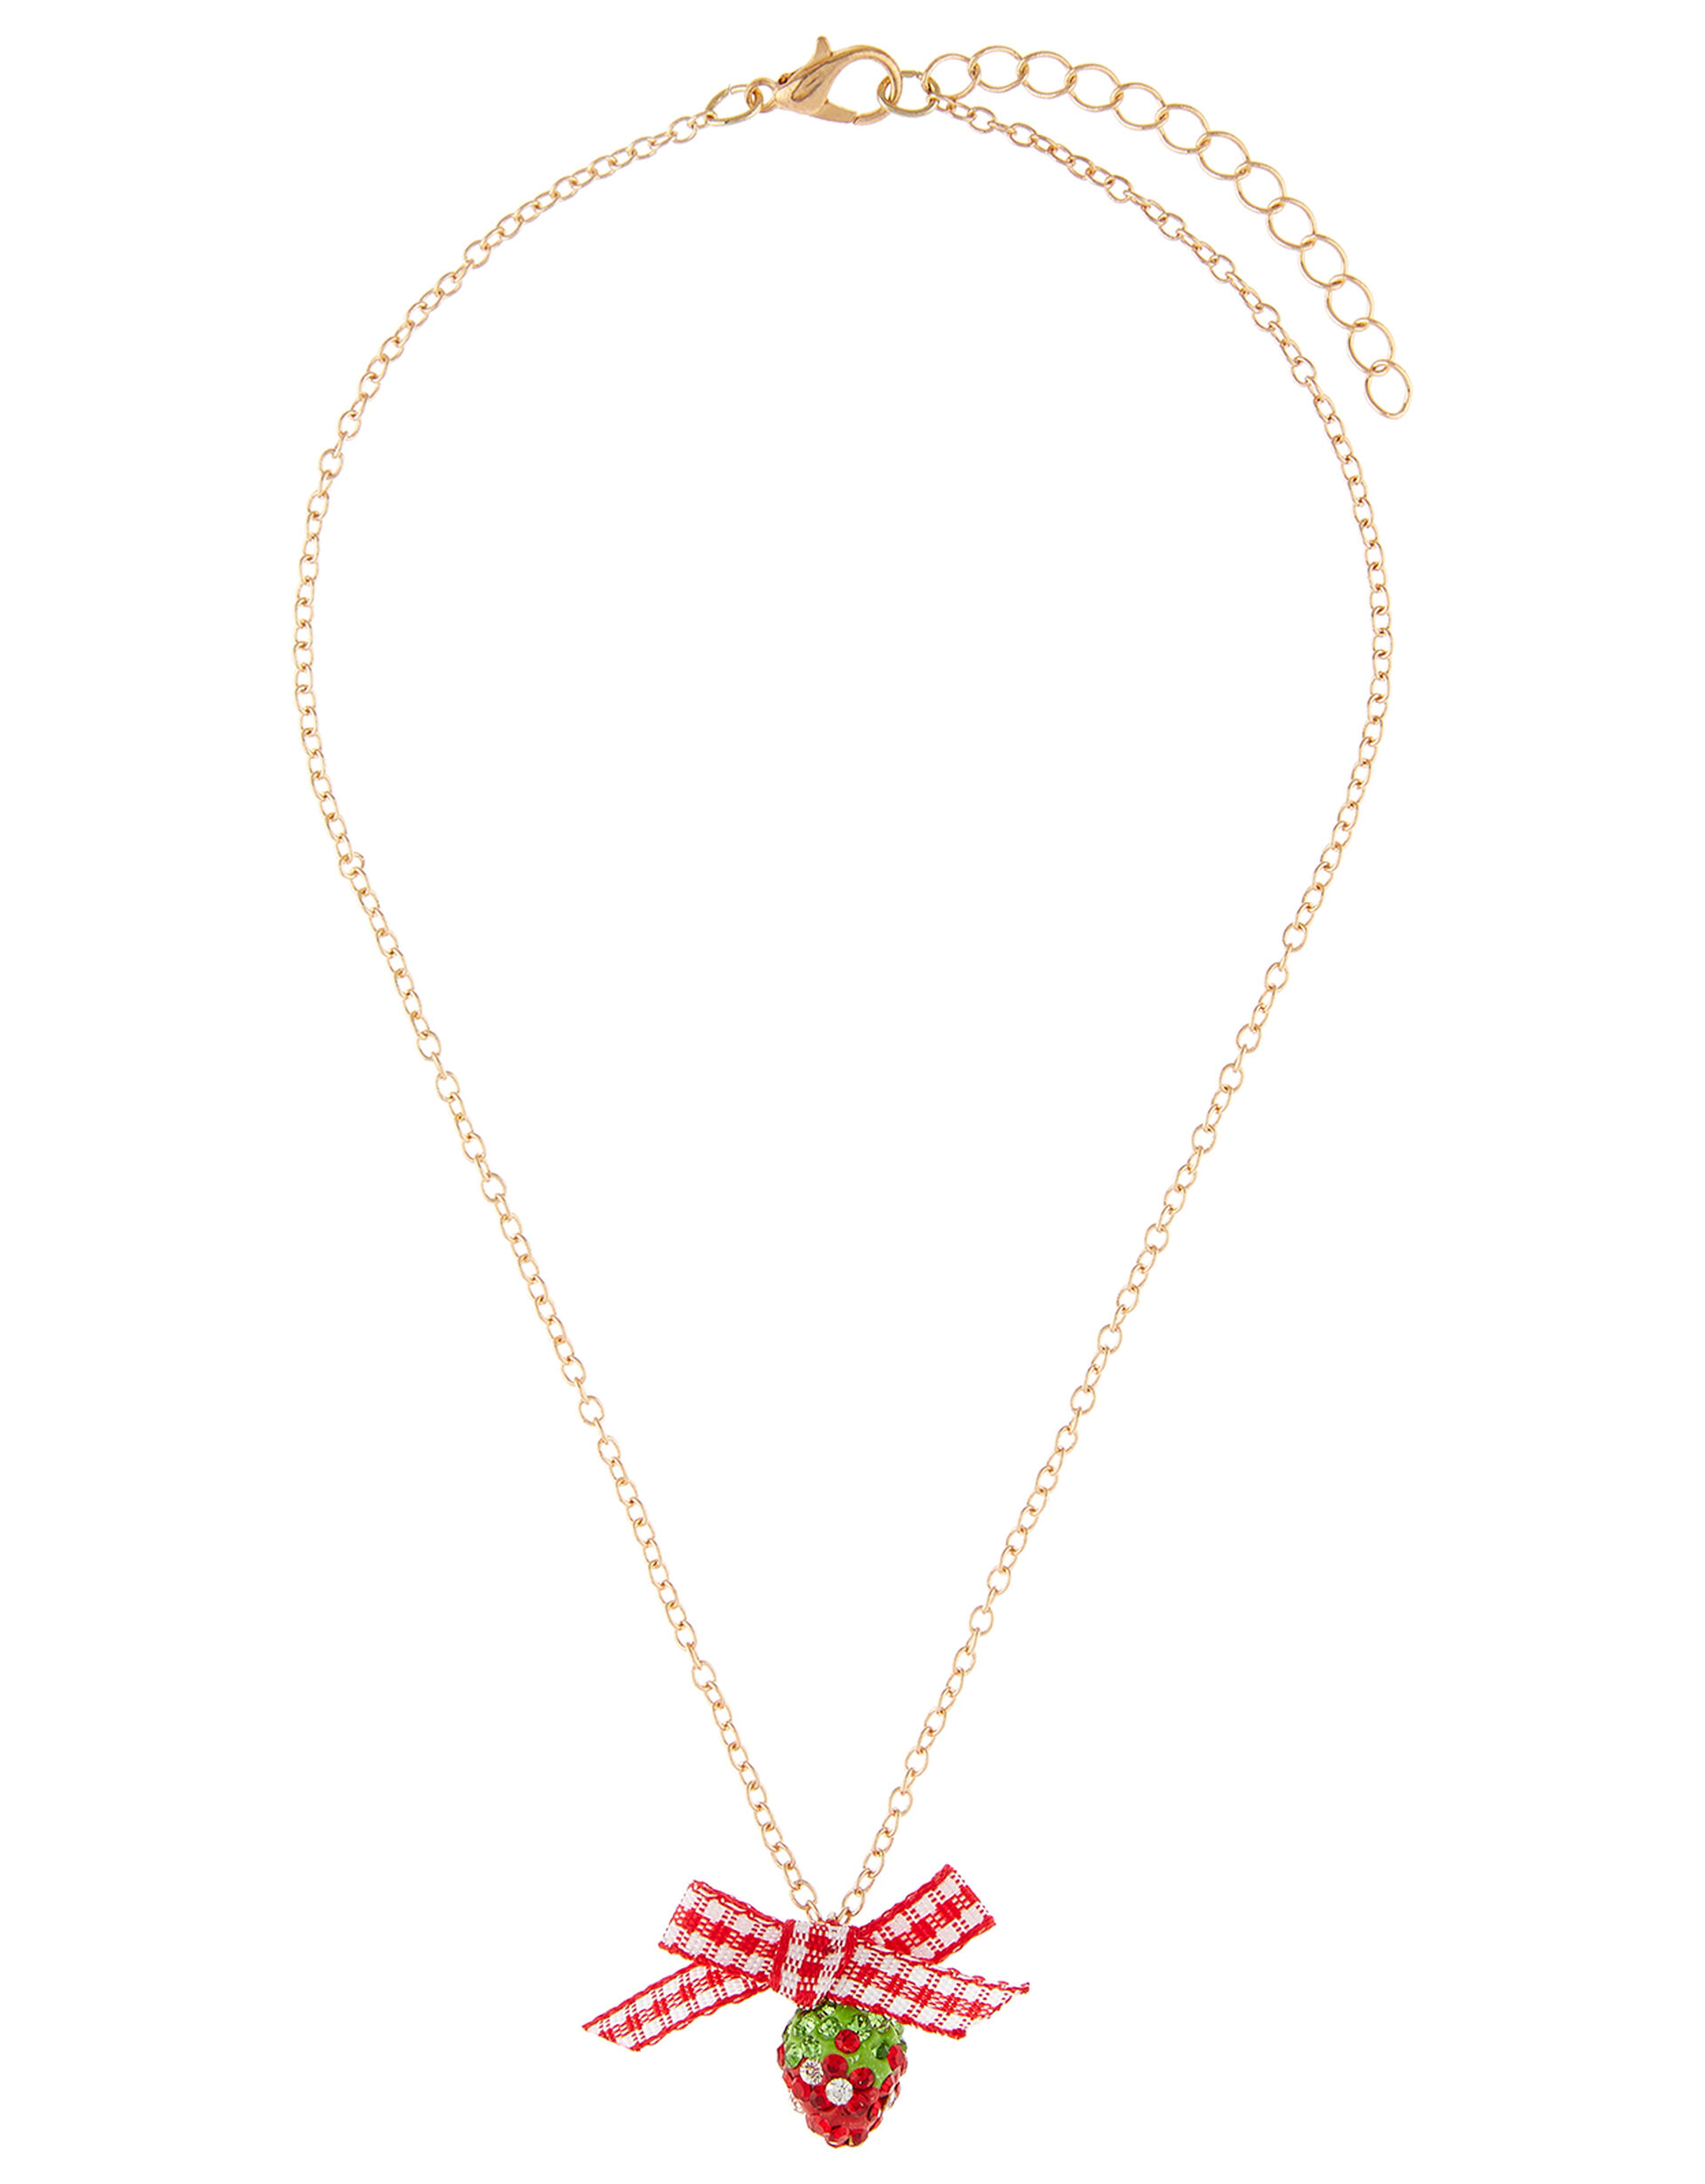 Strawberry Delight Sparkle Necklace, , large